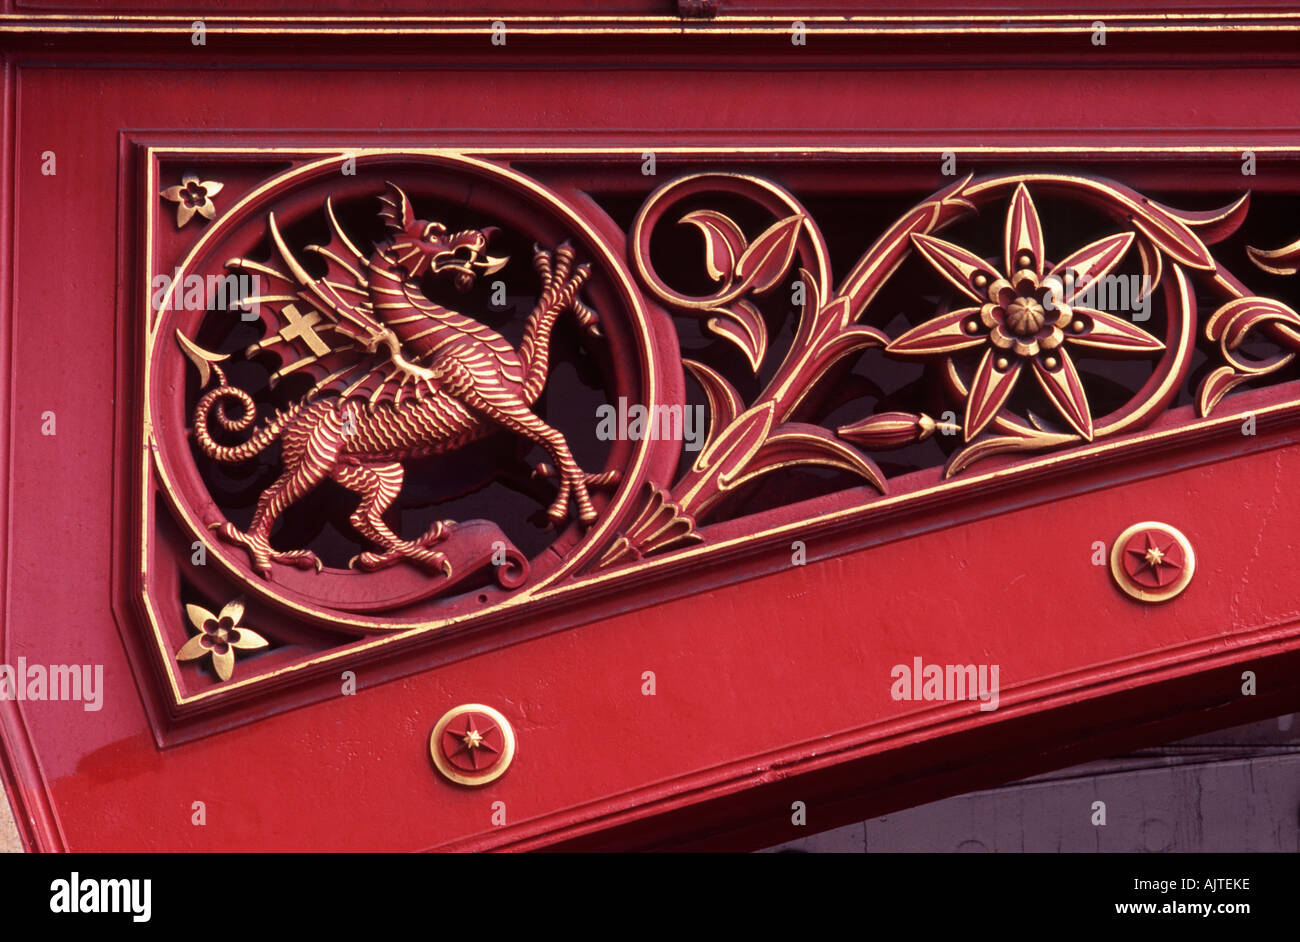 Victorian engineering: red dragon - emblem of the City of London - and floral design on spandrel of Holborn Viaduct Stock Photo